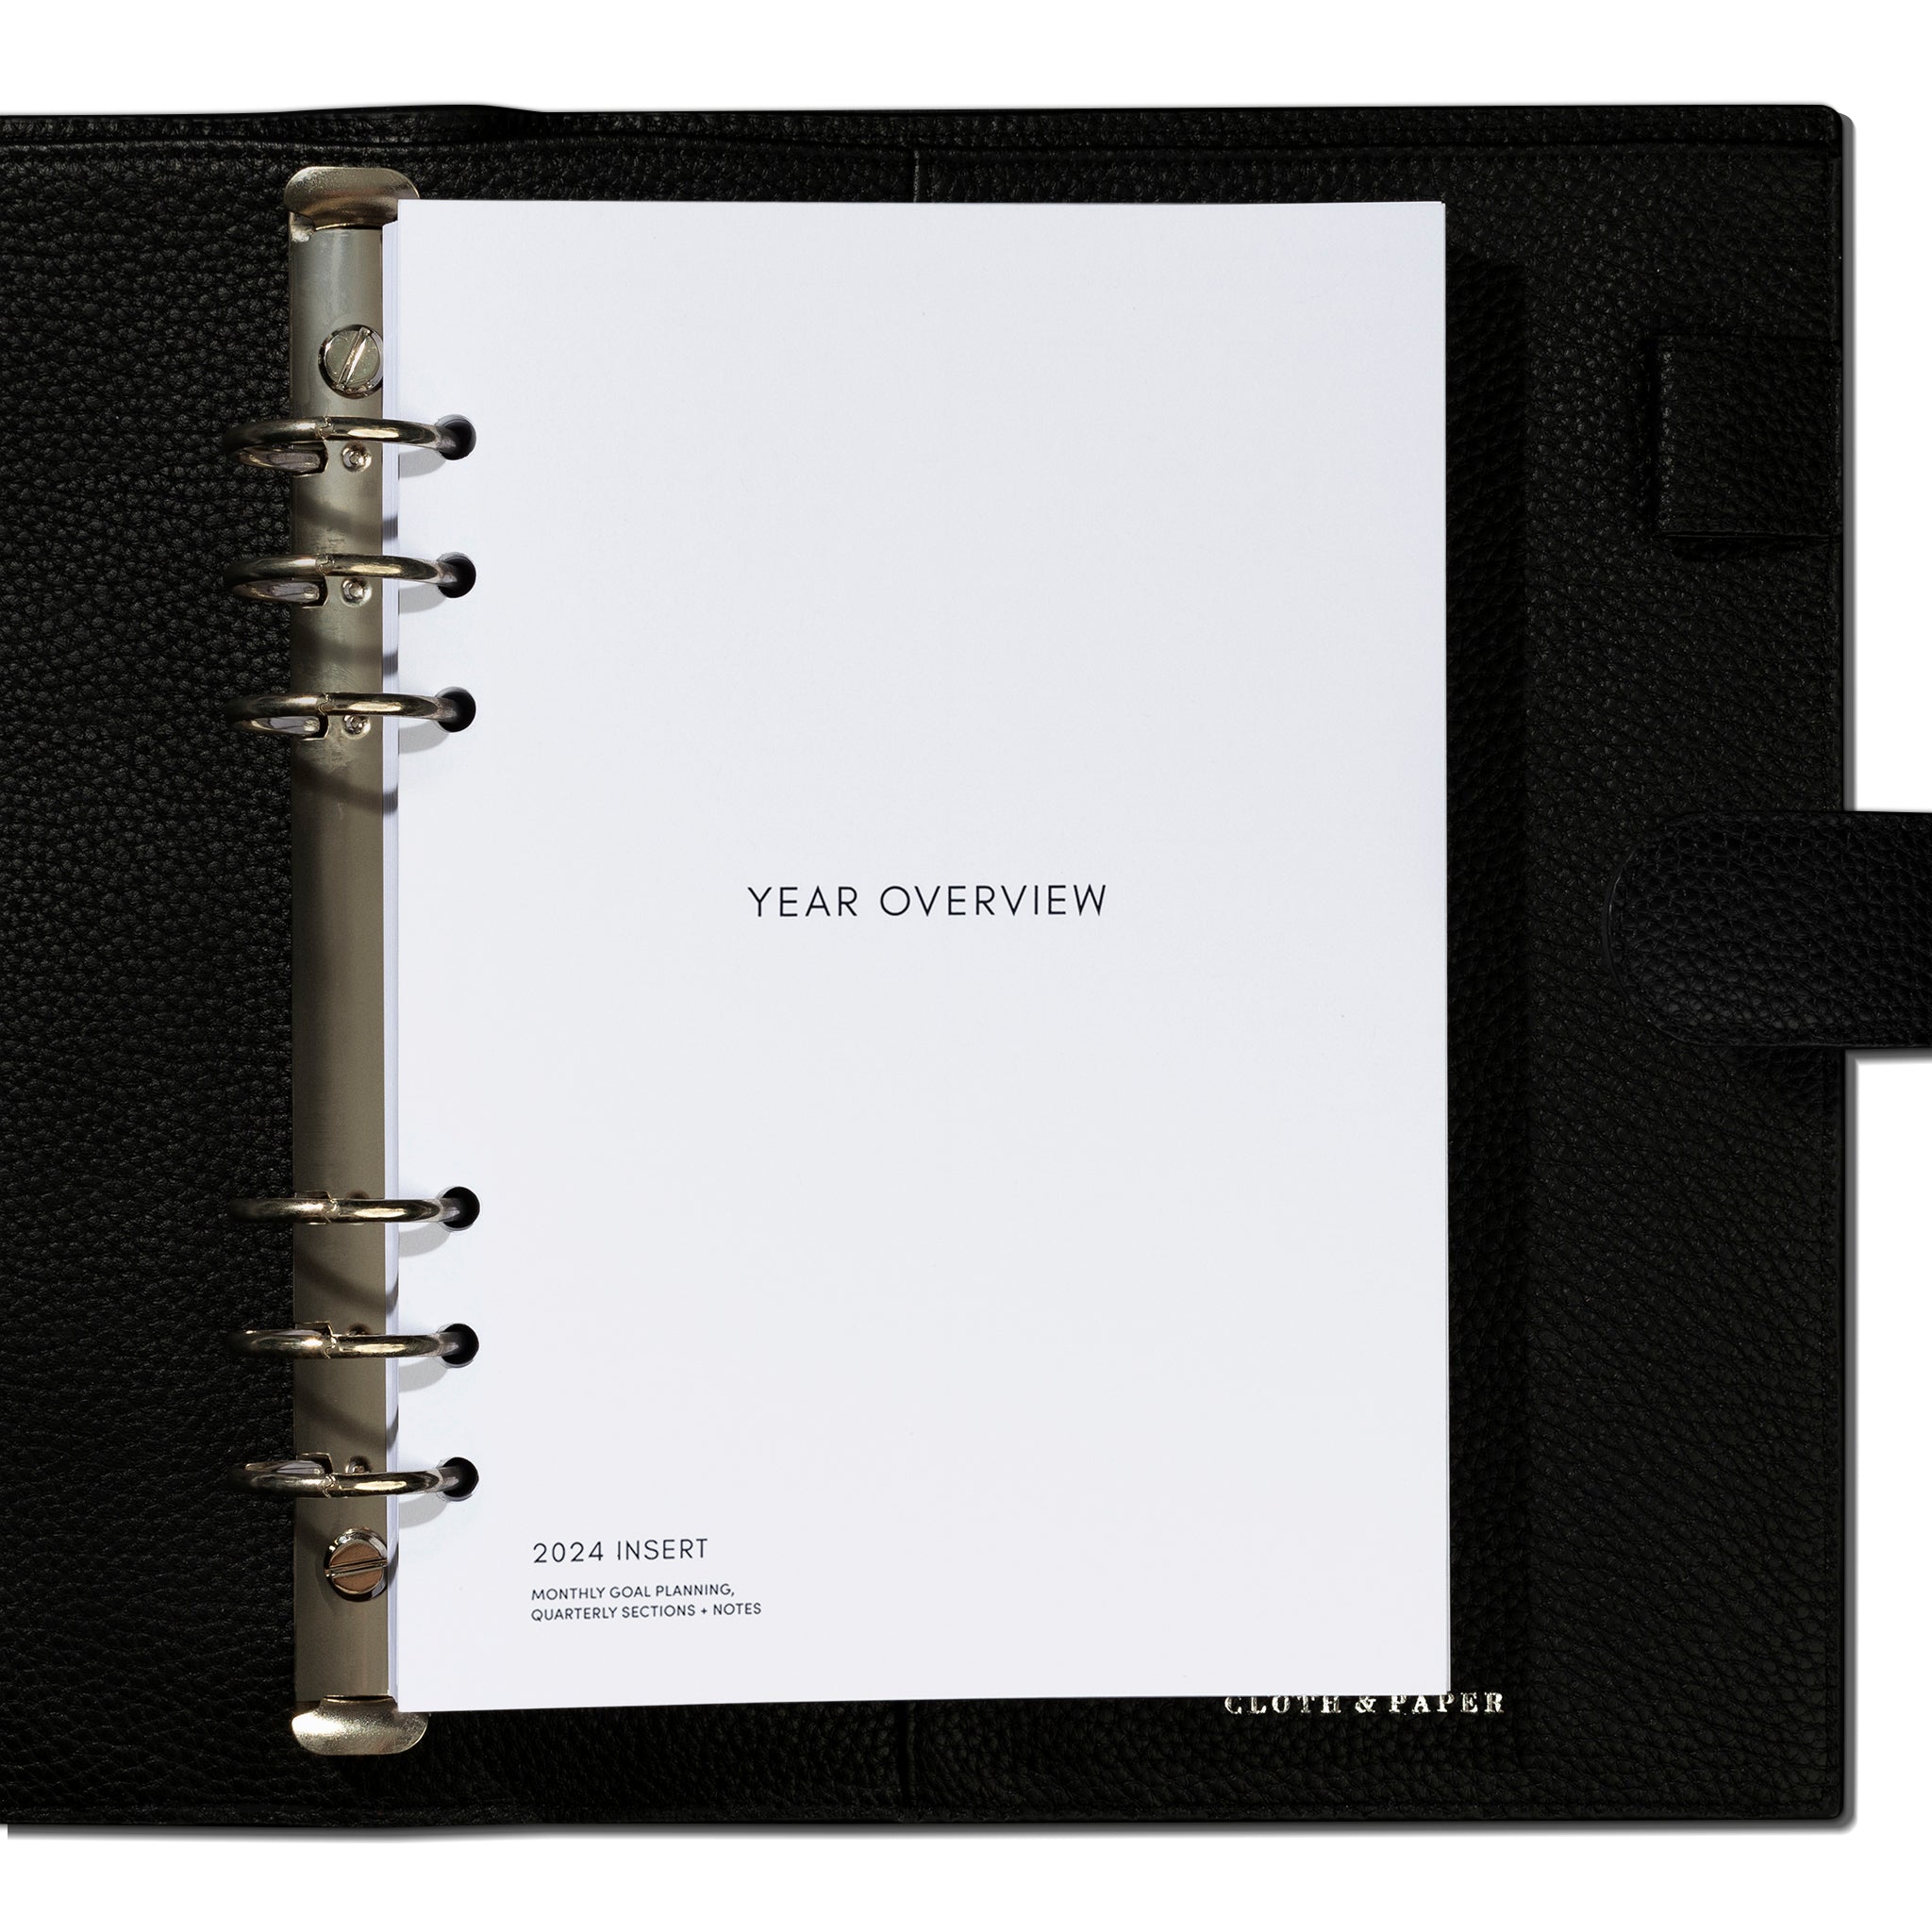 CLOTH & PAPER - LUXURY AESTHETIC PLANNERS, DIVIDERS, & INSERTS